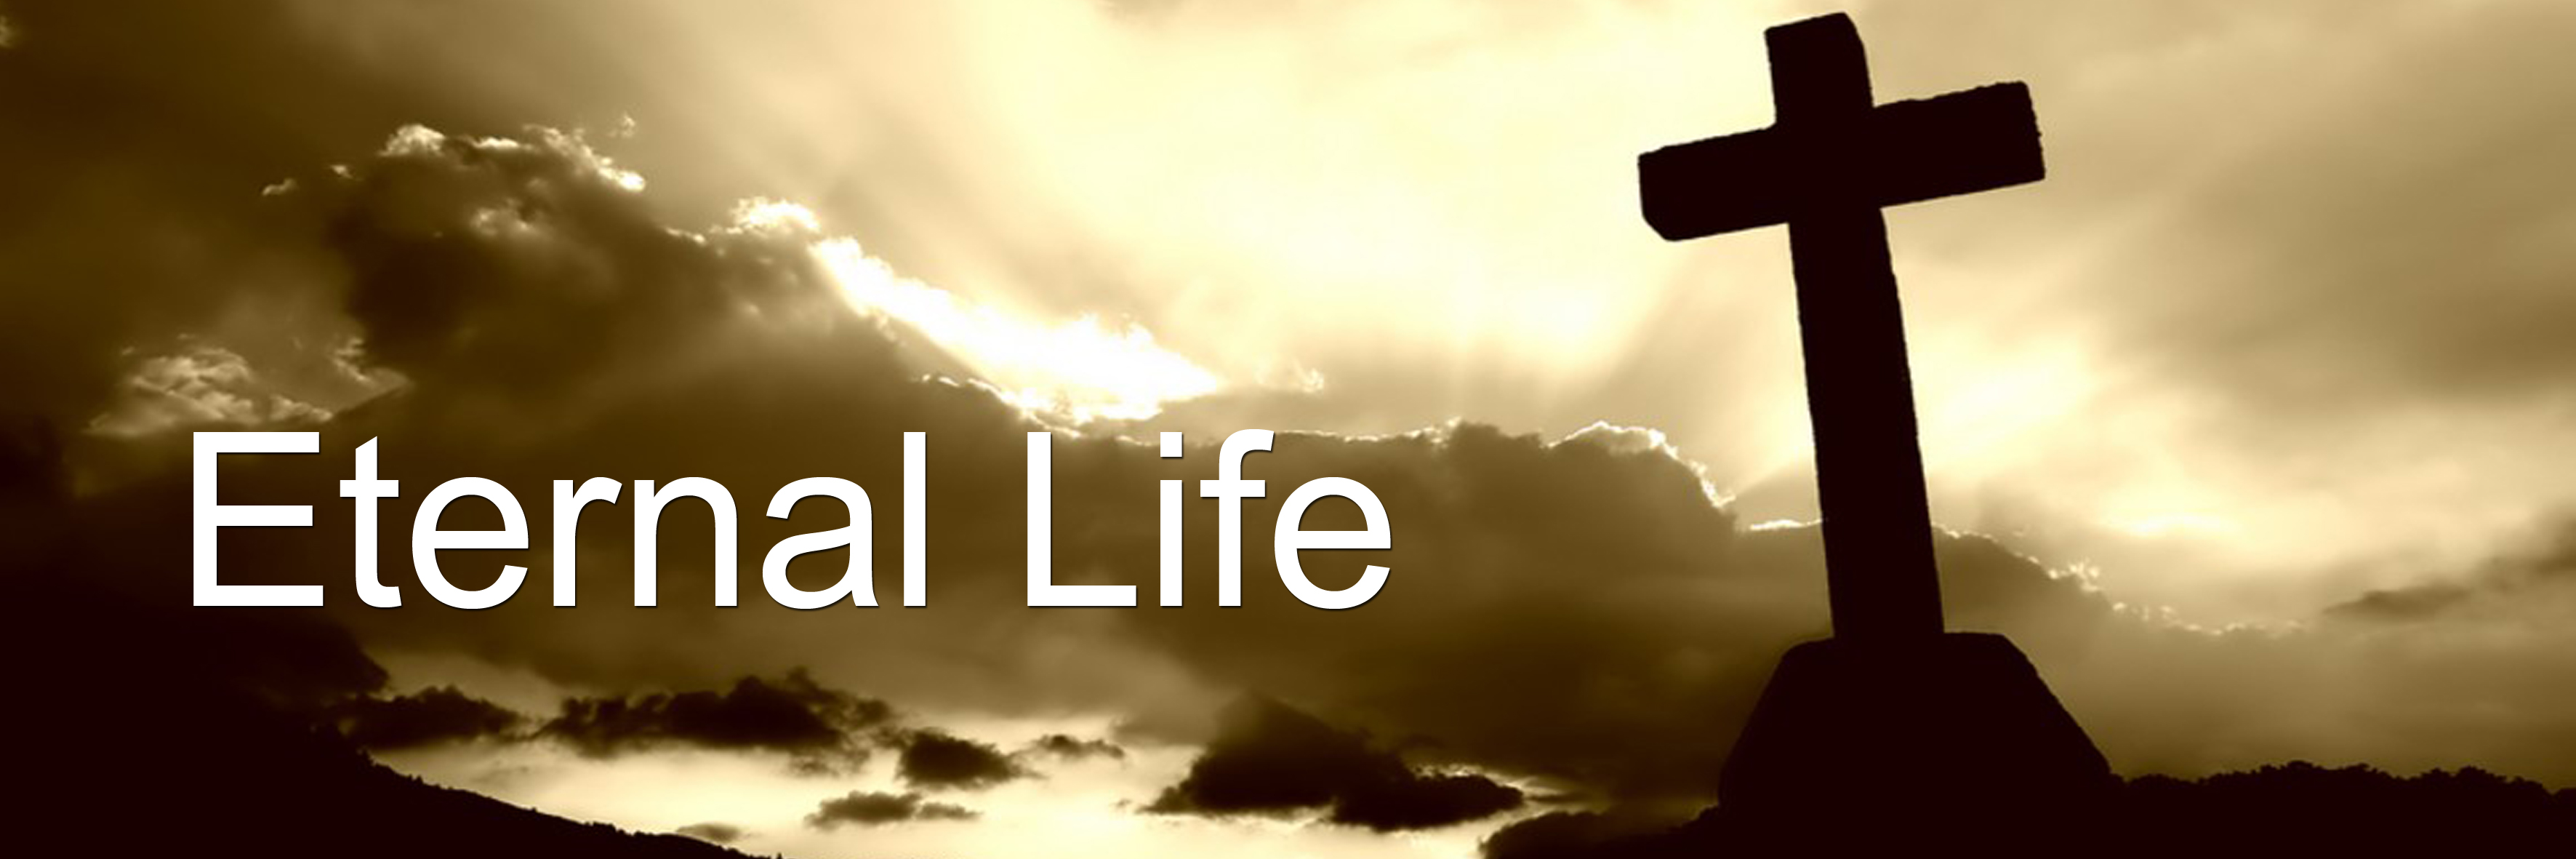 God's Offer of Eternal Life is not Easy to Believe